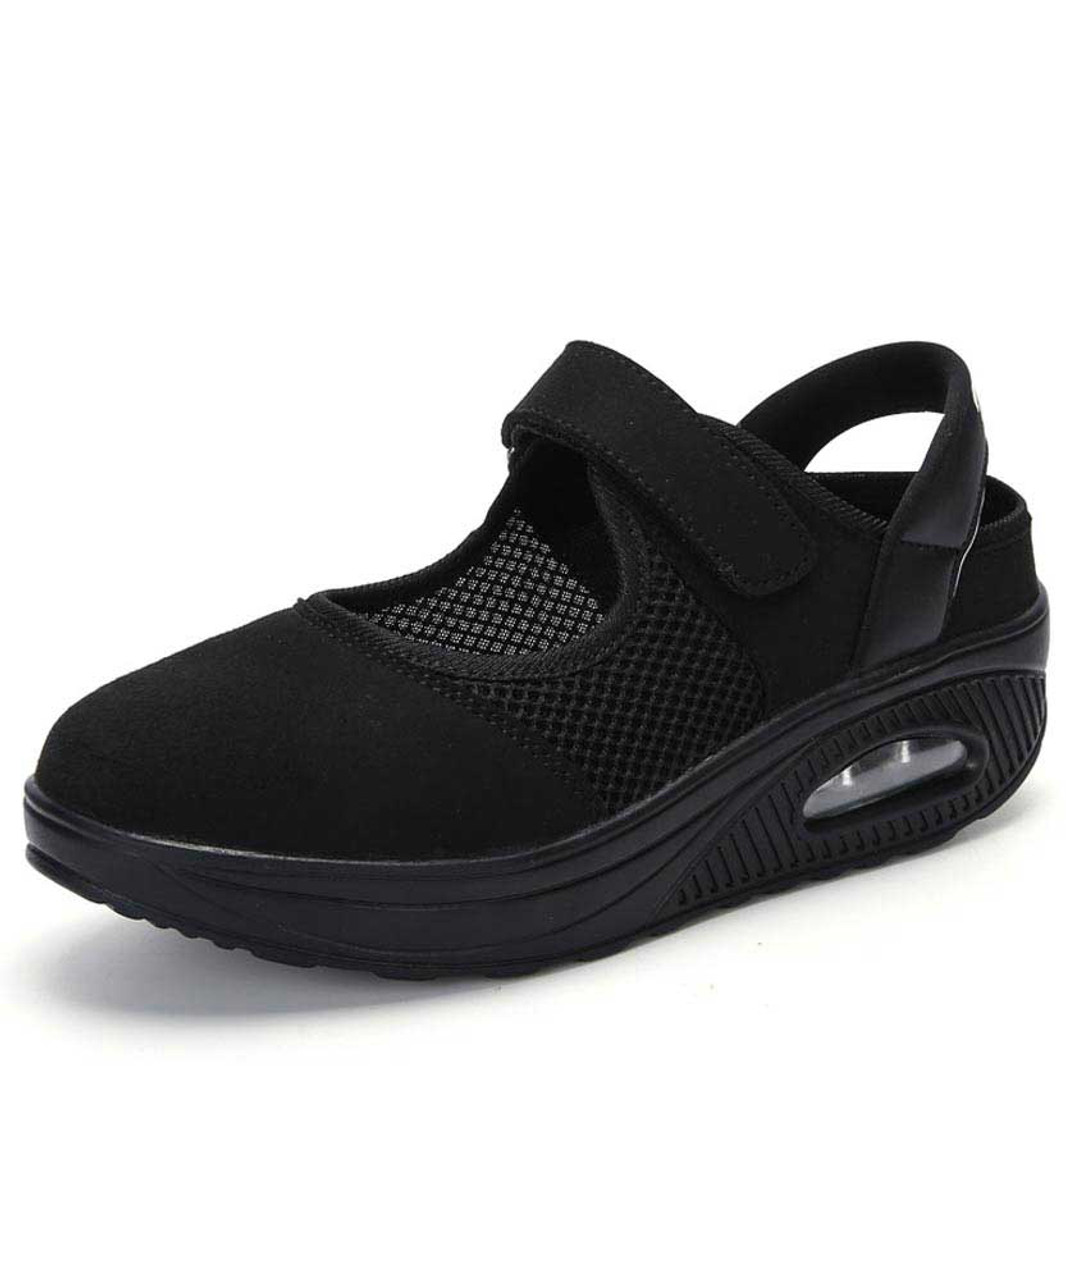 Shop Kids Shoes | Tracer India | Tracer Tr-2 Unisex Lightweight School Shoes  with Velcro Closure (1-5) - Black – TracerIndia